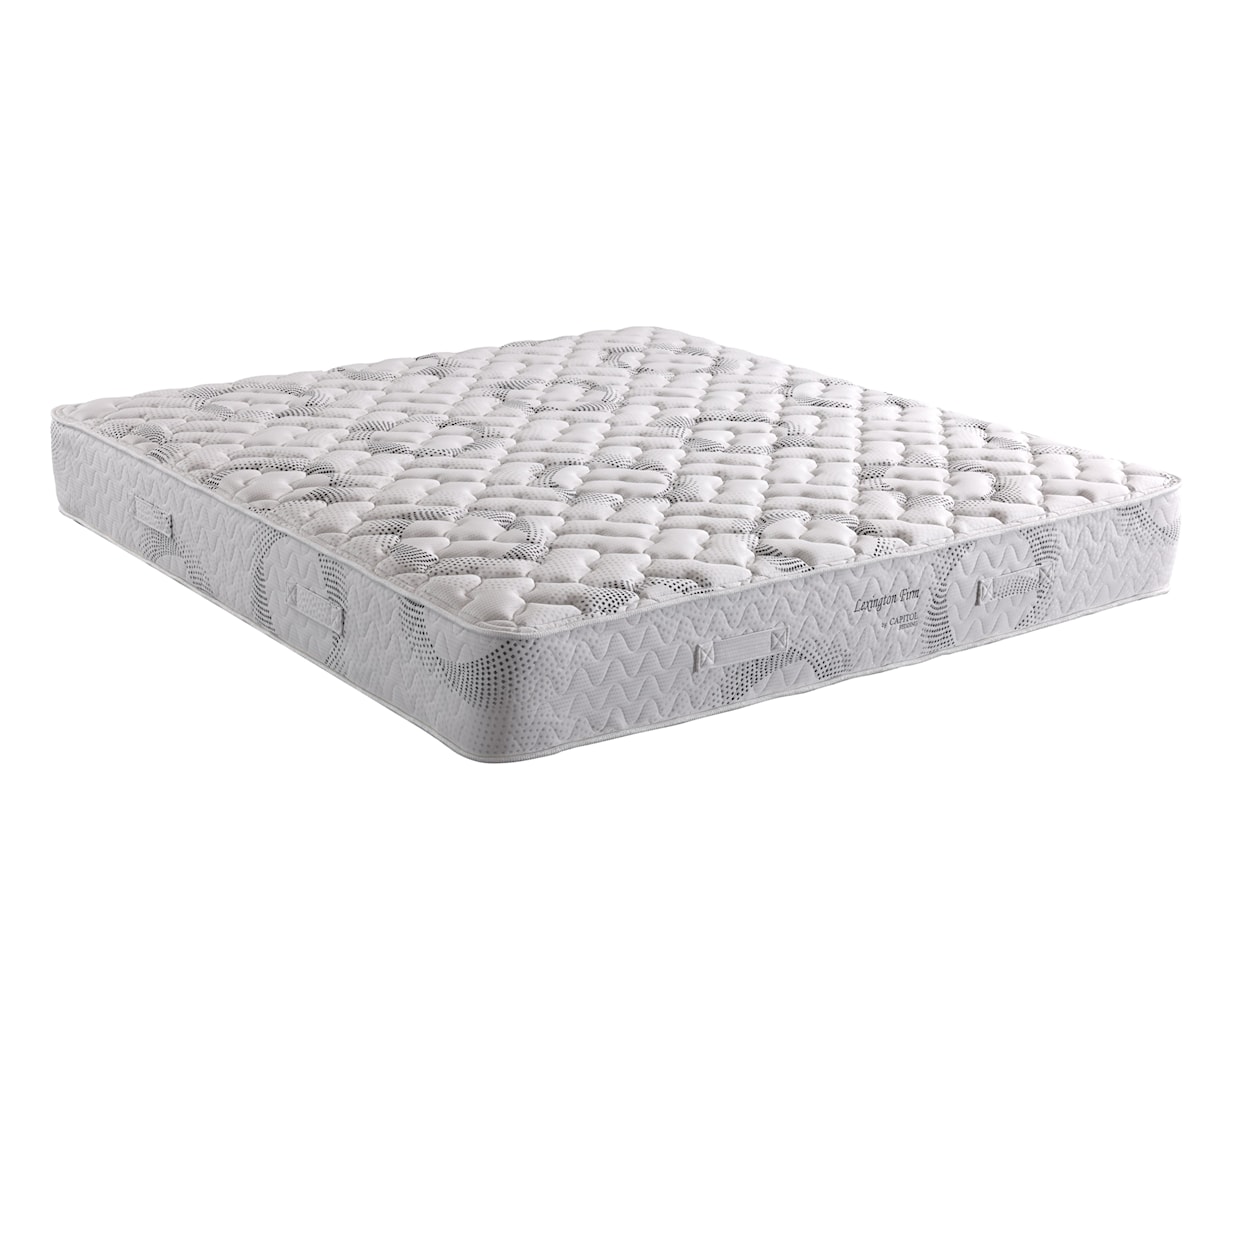 Capitol Bedding Lexington Firm 2023 King Firm Two Sided Mattress